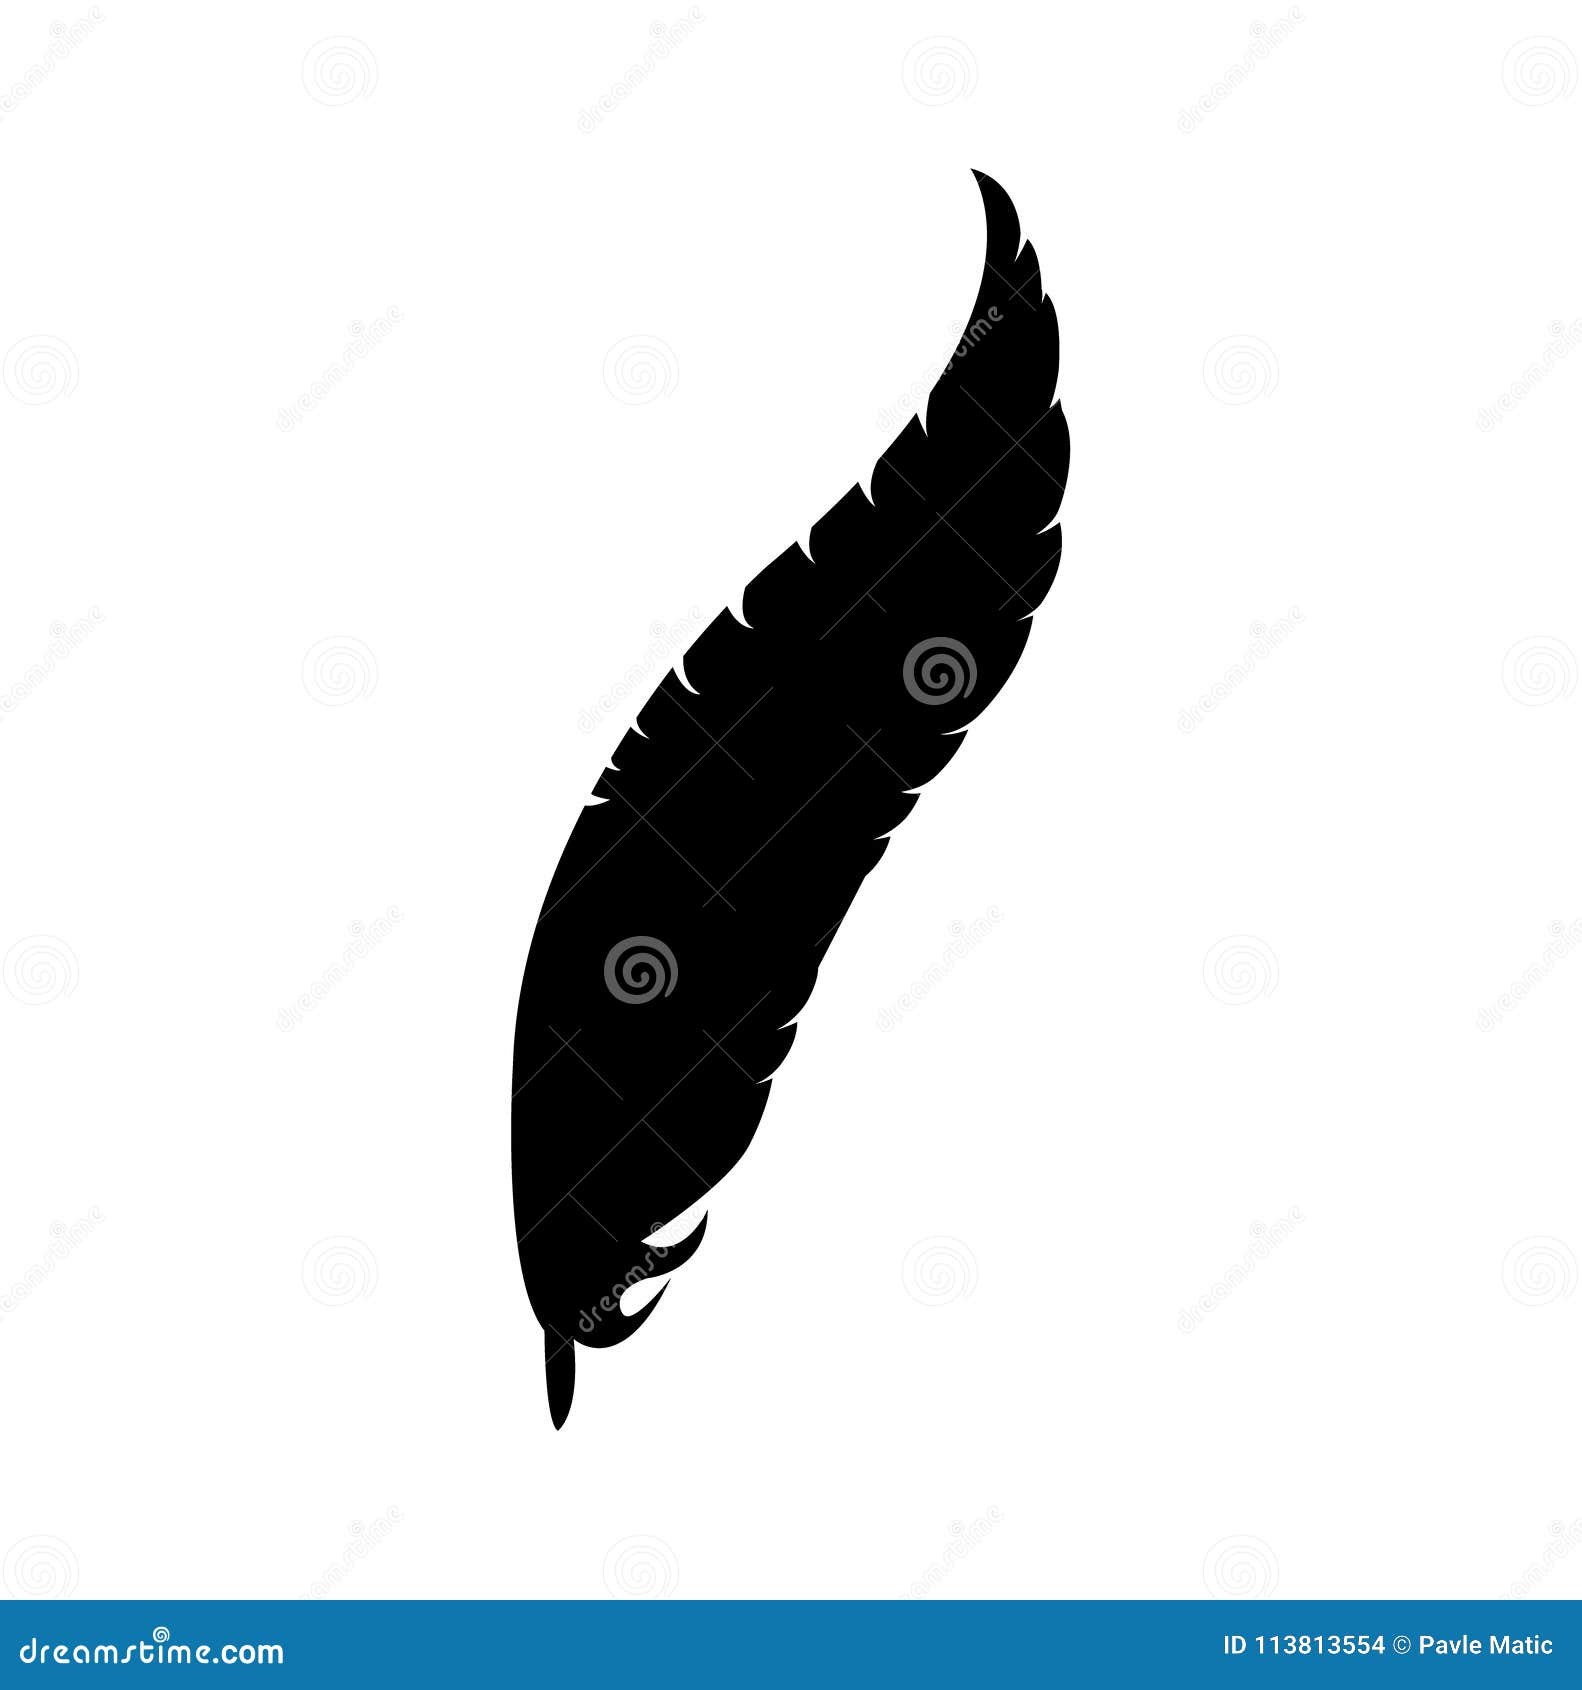 Download Simple, Black Feather Silhouette Stock Vector ...